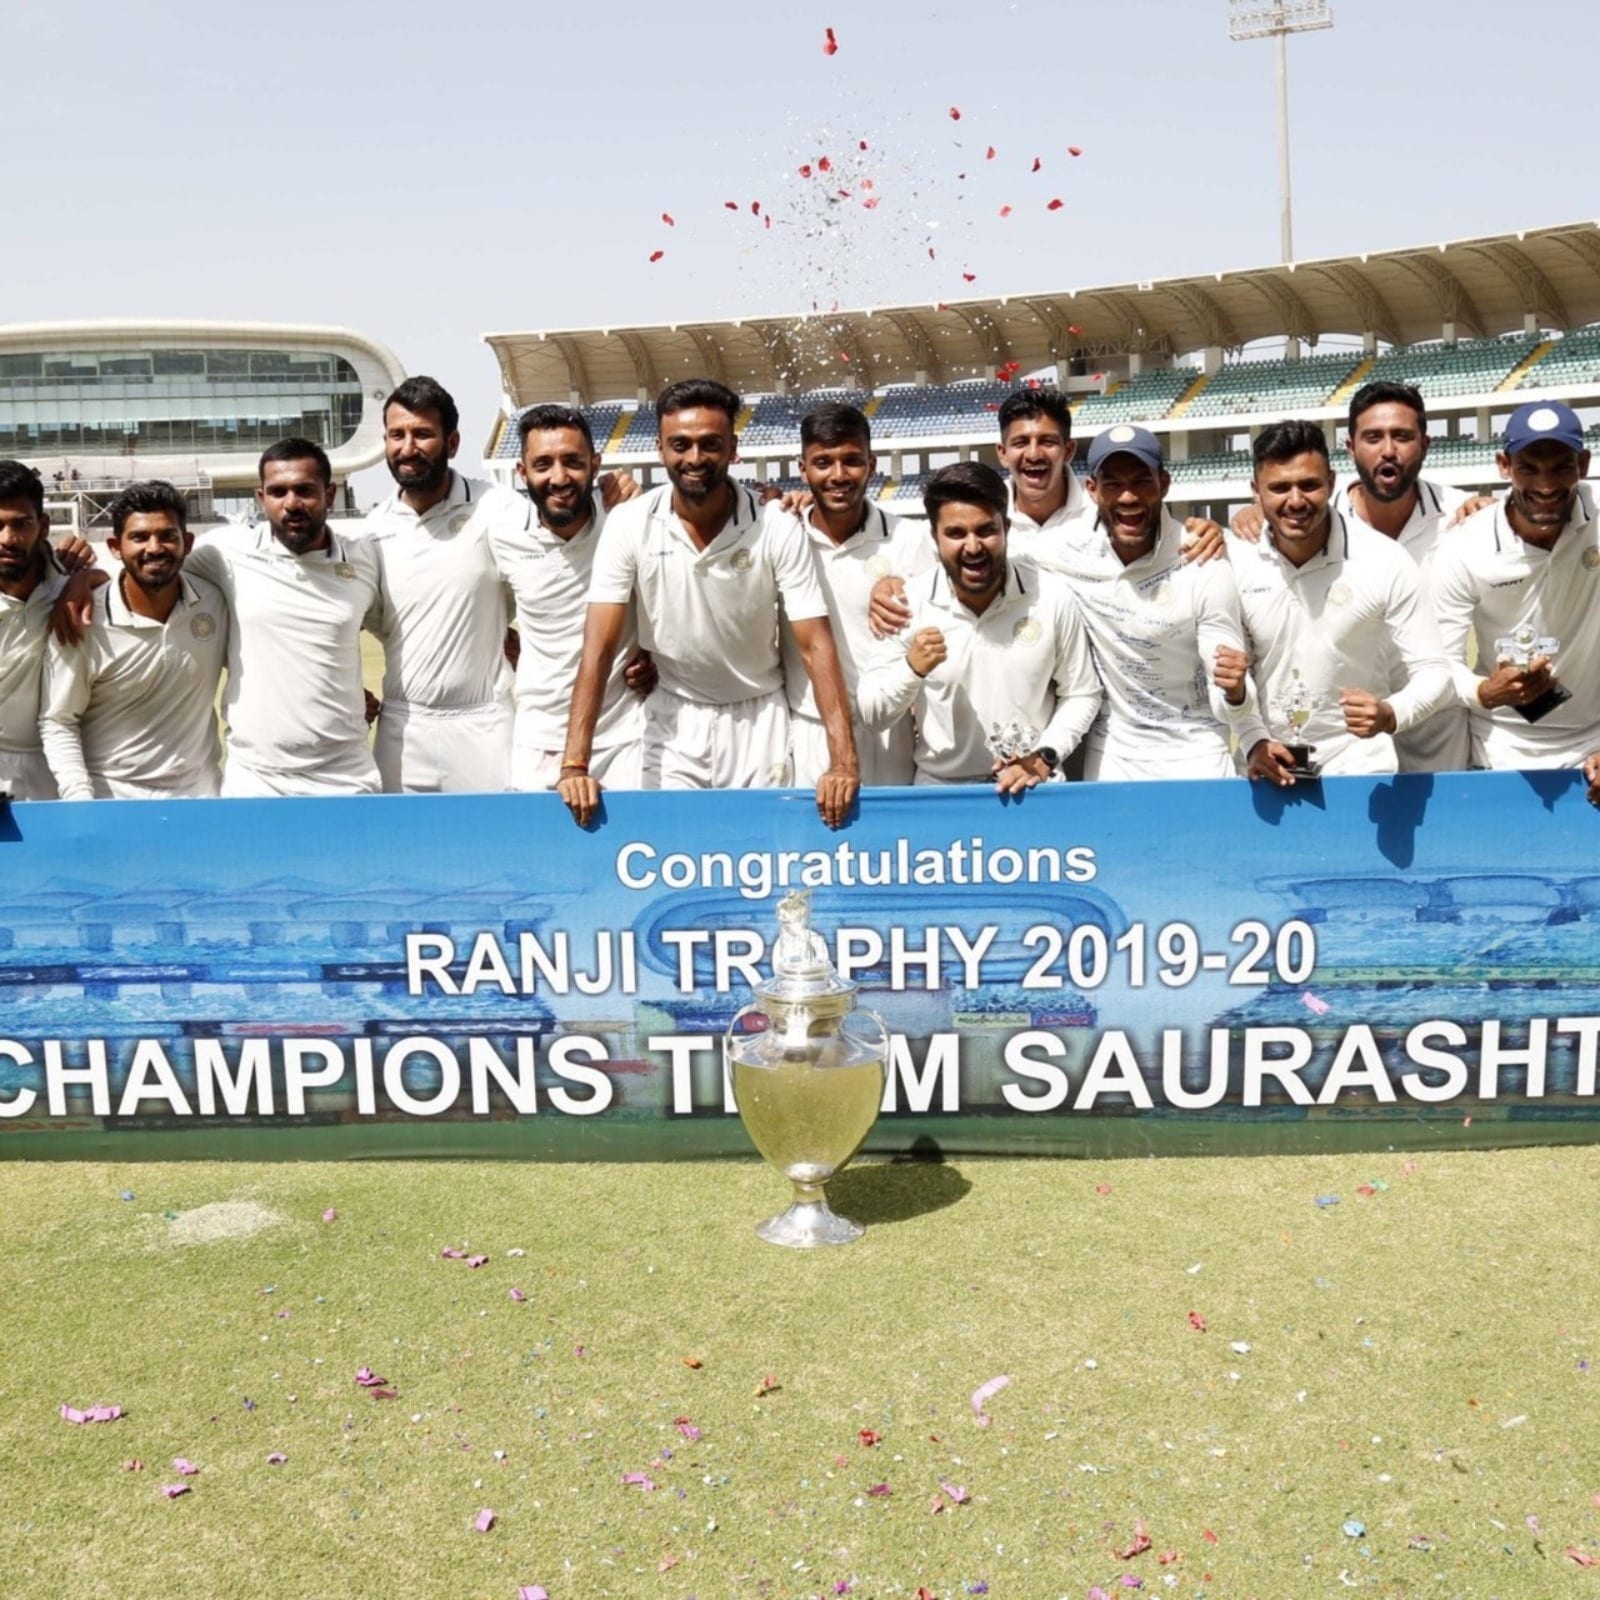 Ranji Trophy 2022 Full schedule, squads, match timings, and live streaming details